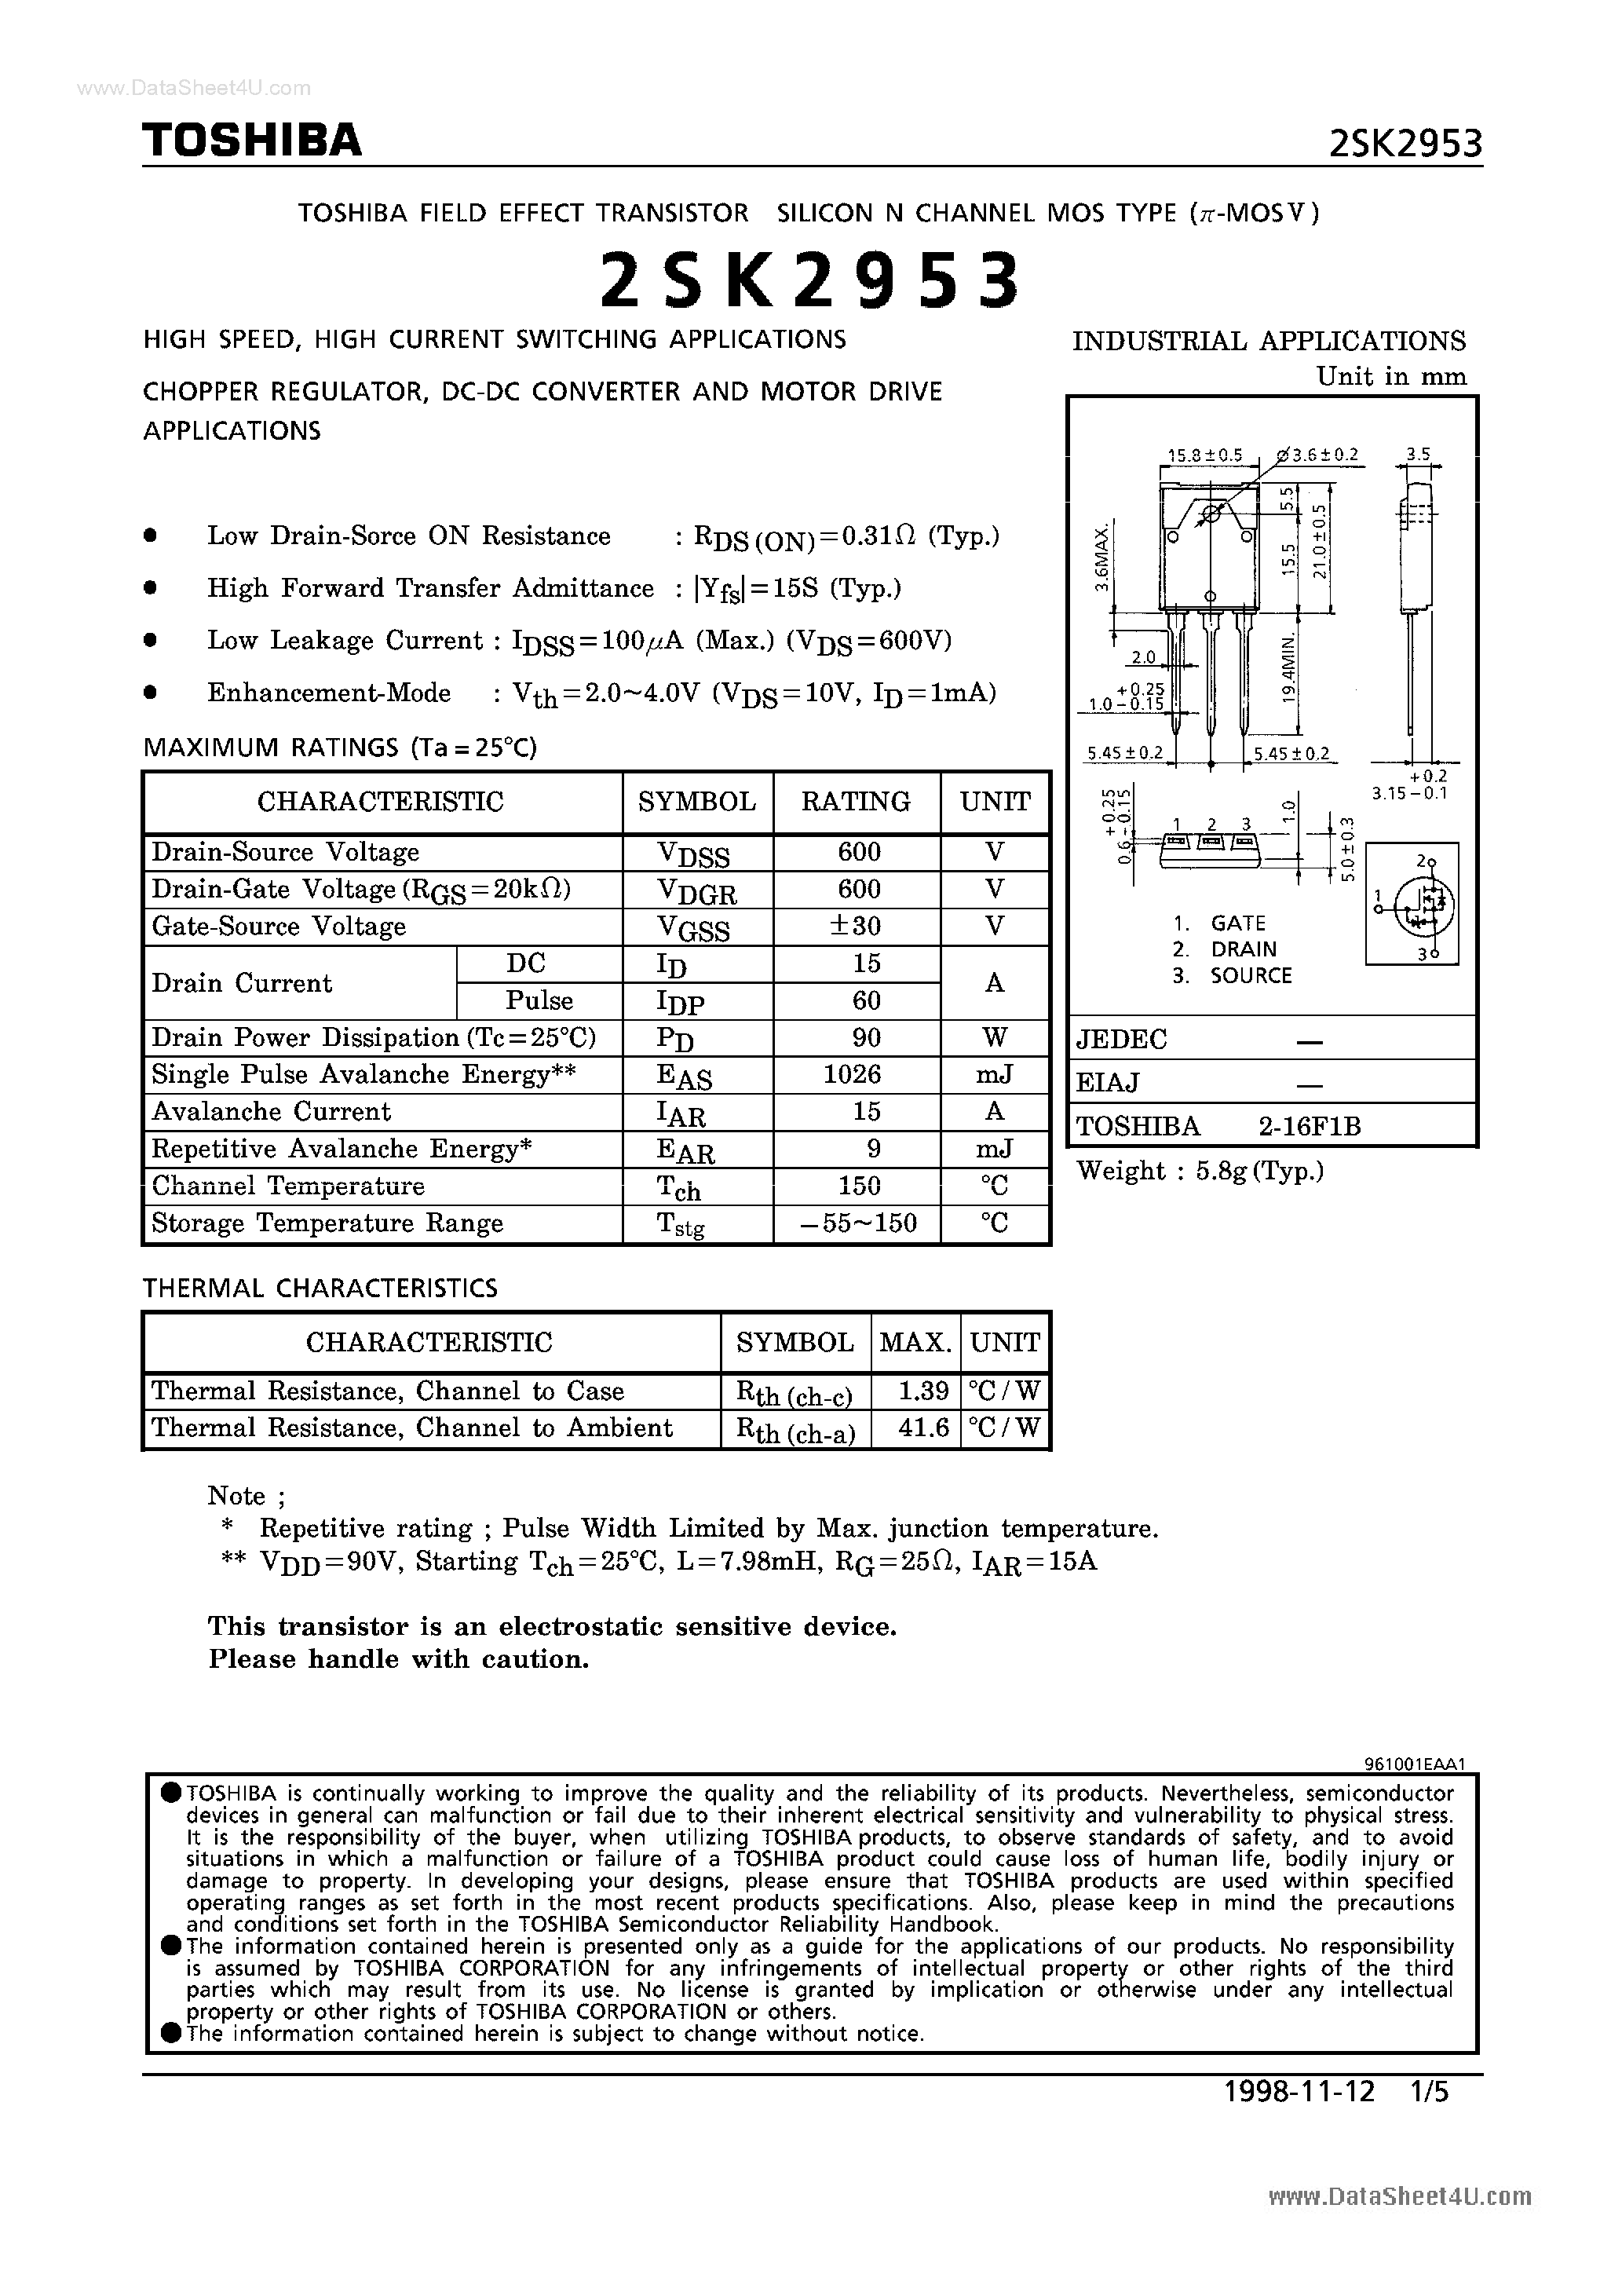 Datasheet K2953 - Search -----> 2SK2953 page 1